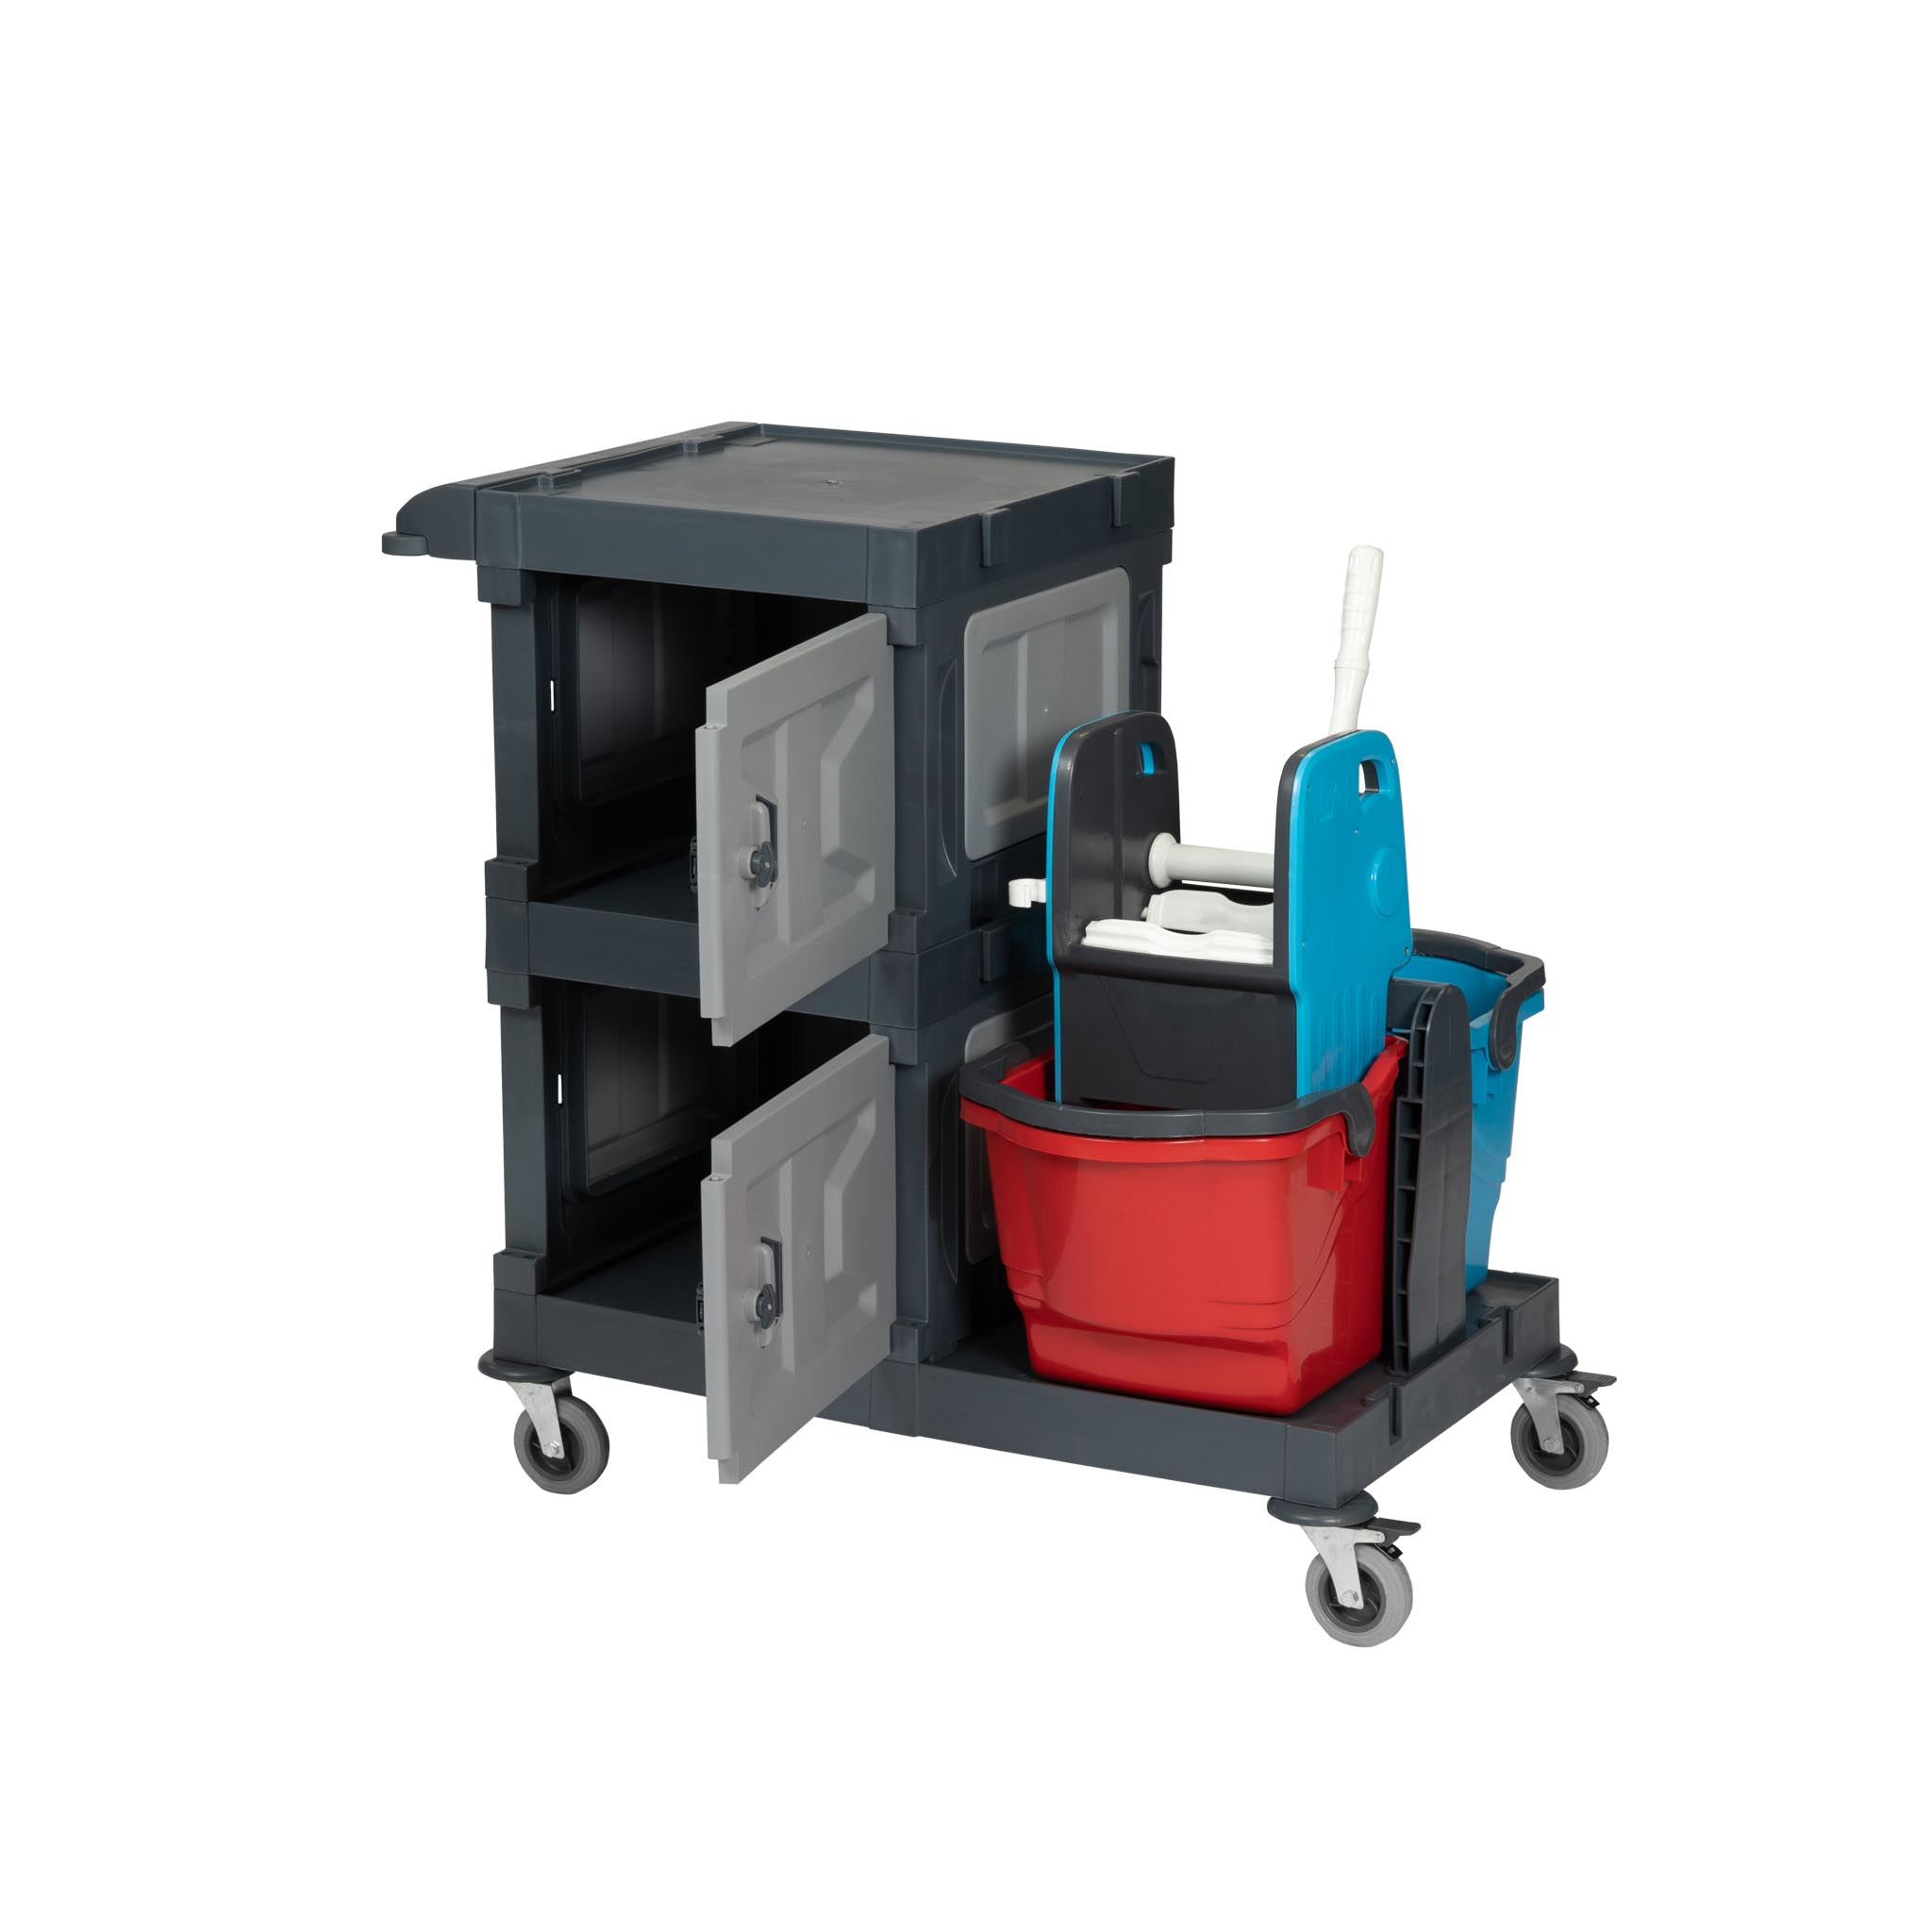 ALFACART HOSPITAL CLEANING TROLLEY